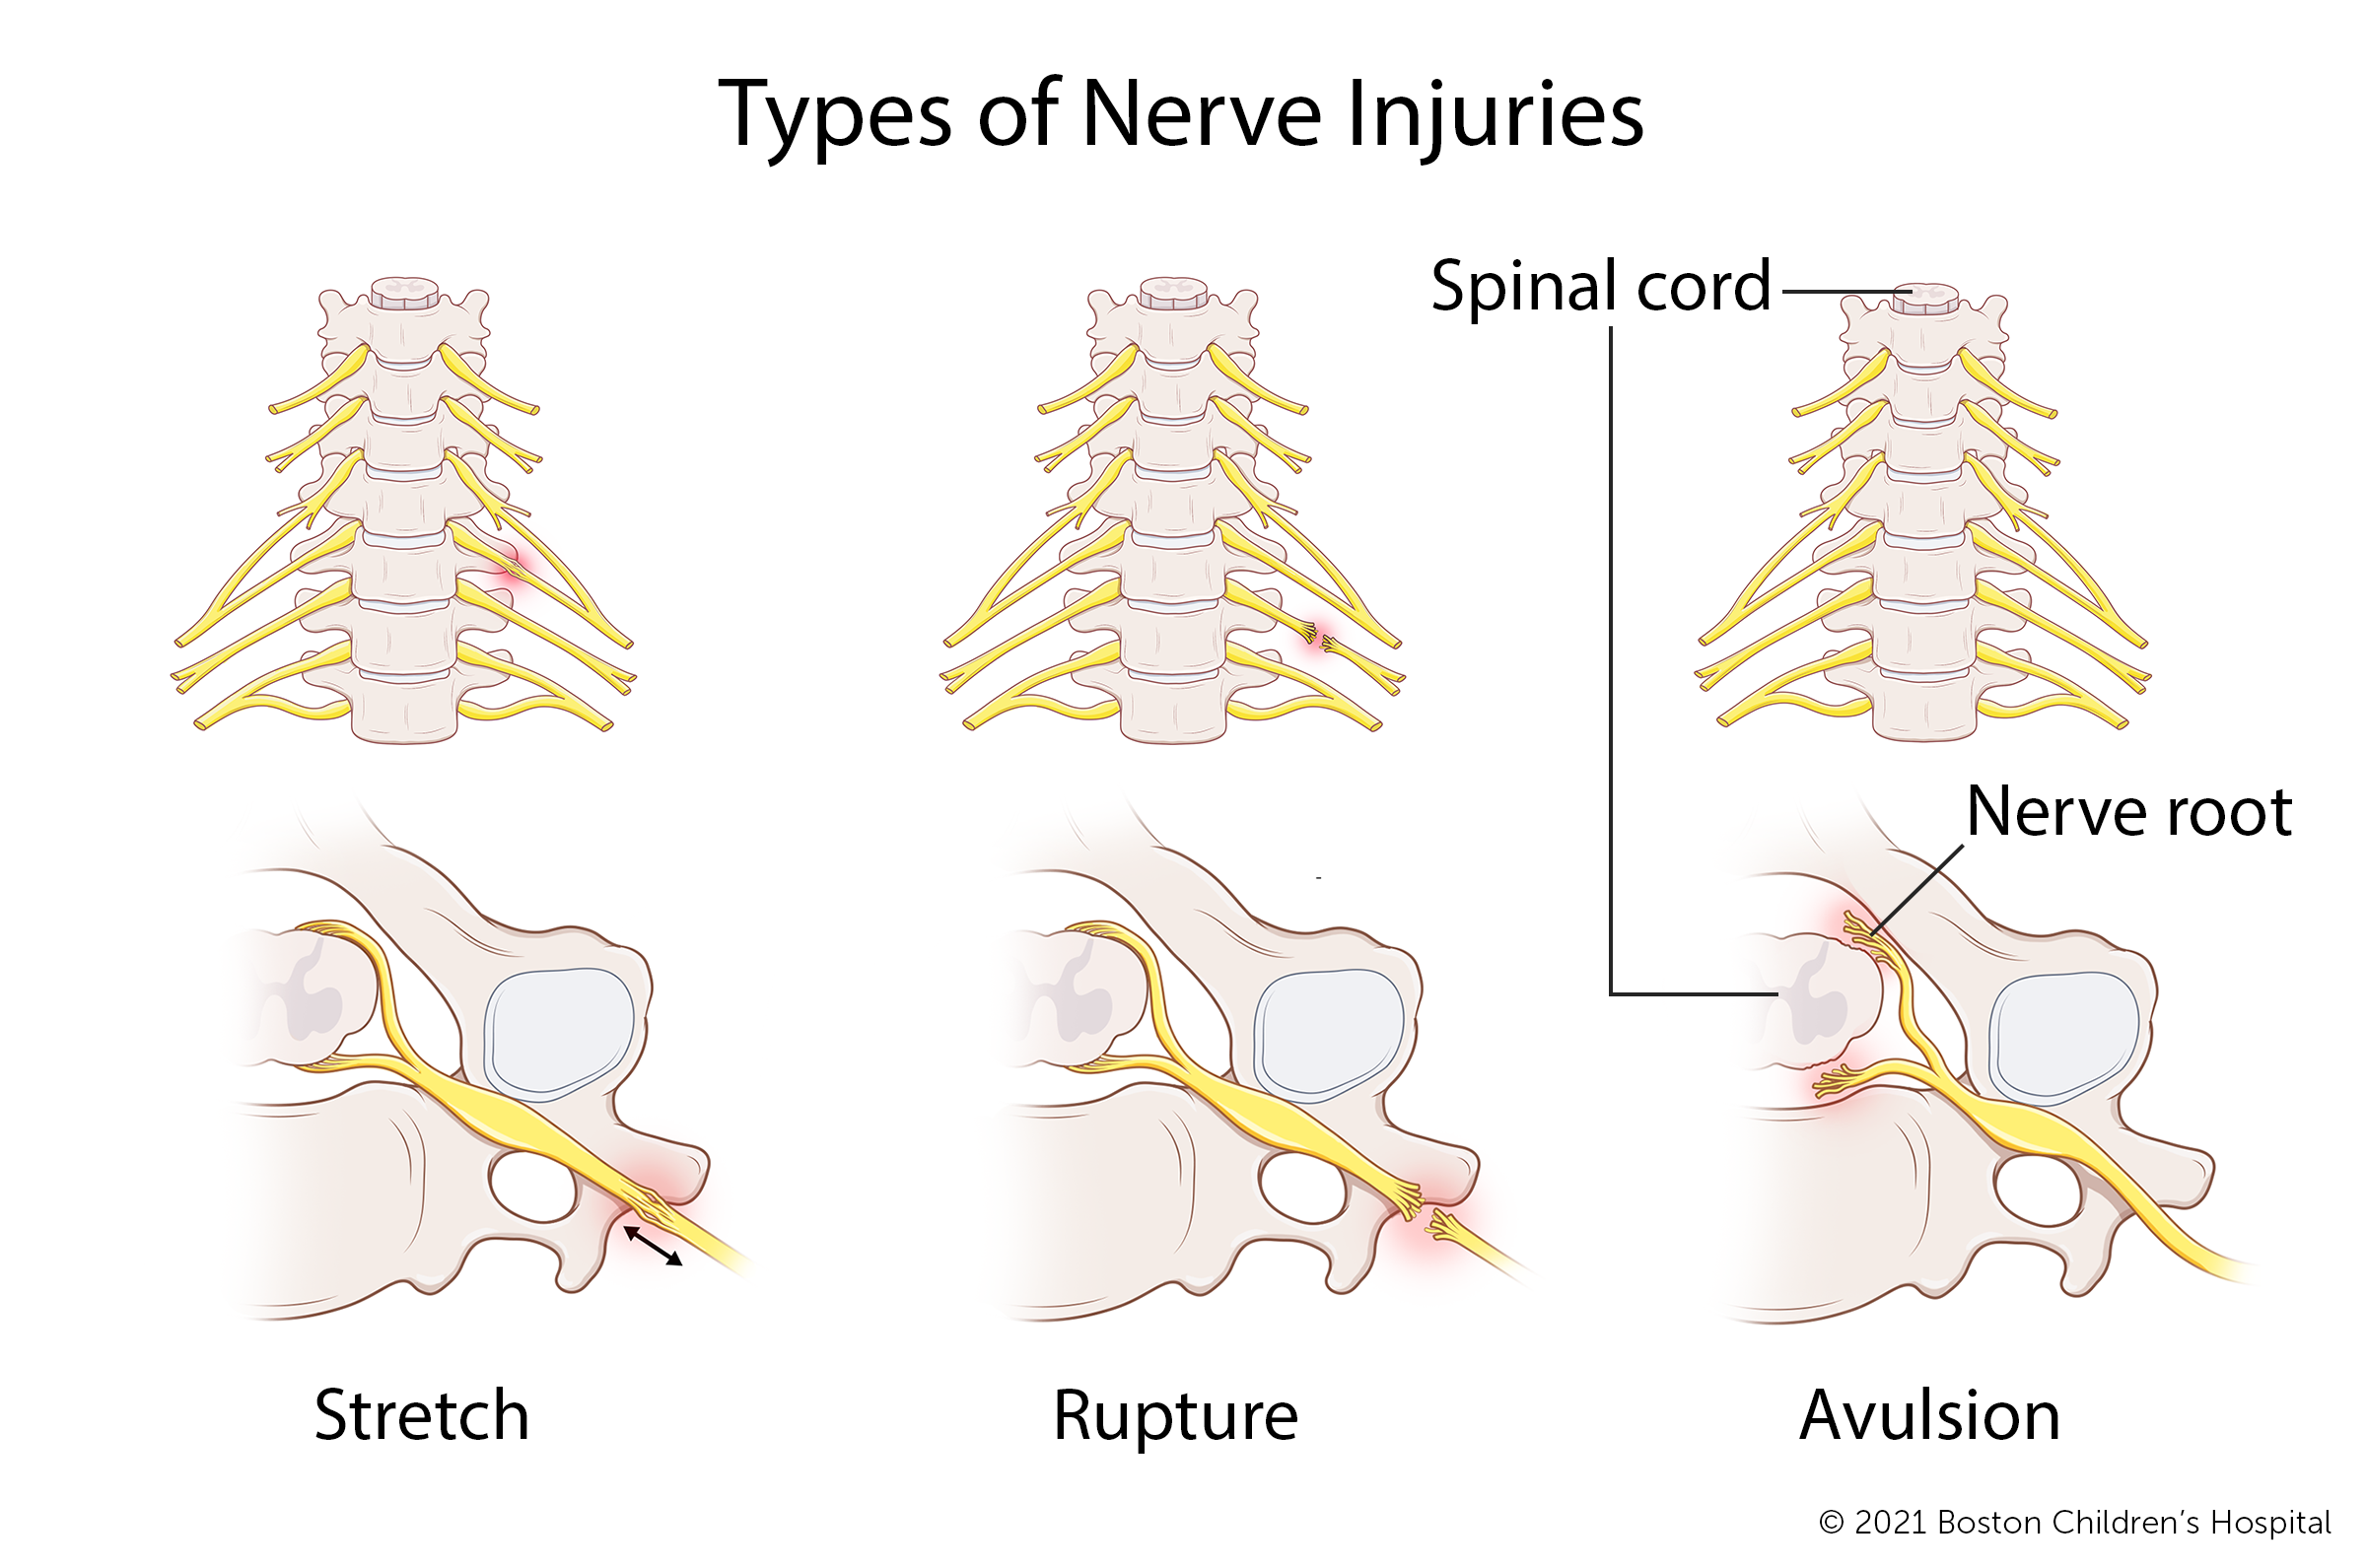 In a stretch brachial plexus injury, the nerve has been stretched, but not torn. In a rupture brachial plexus injury, the nerve has been torn, but remains attached to the spinal cord. In an avulsion brachial plexus injury, the nerve root has separated from the spinal cord. 